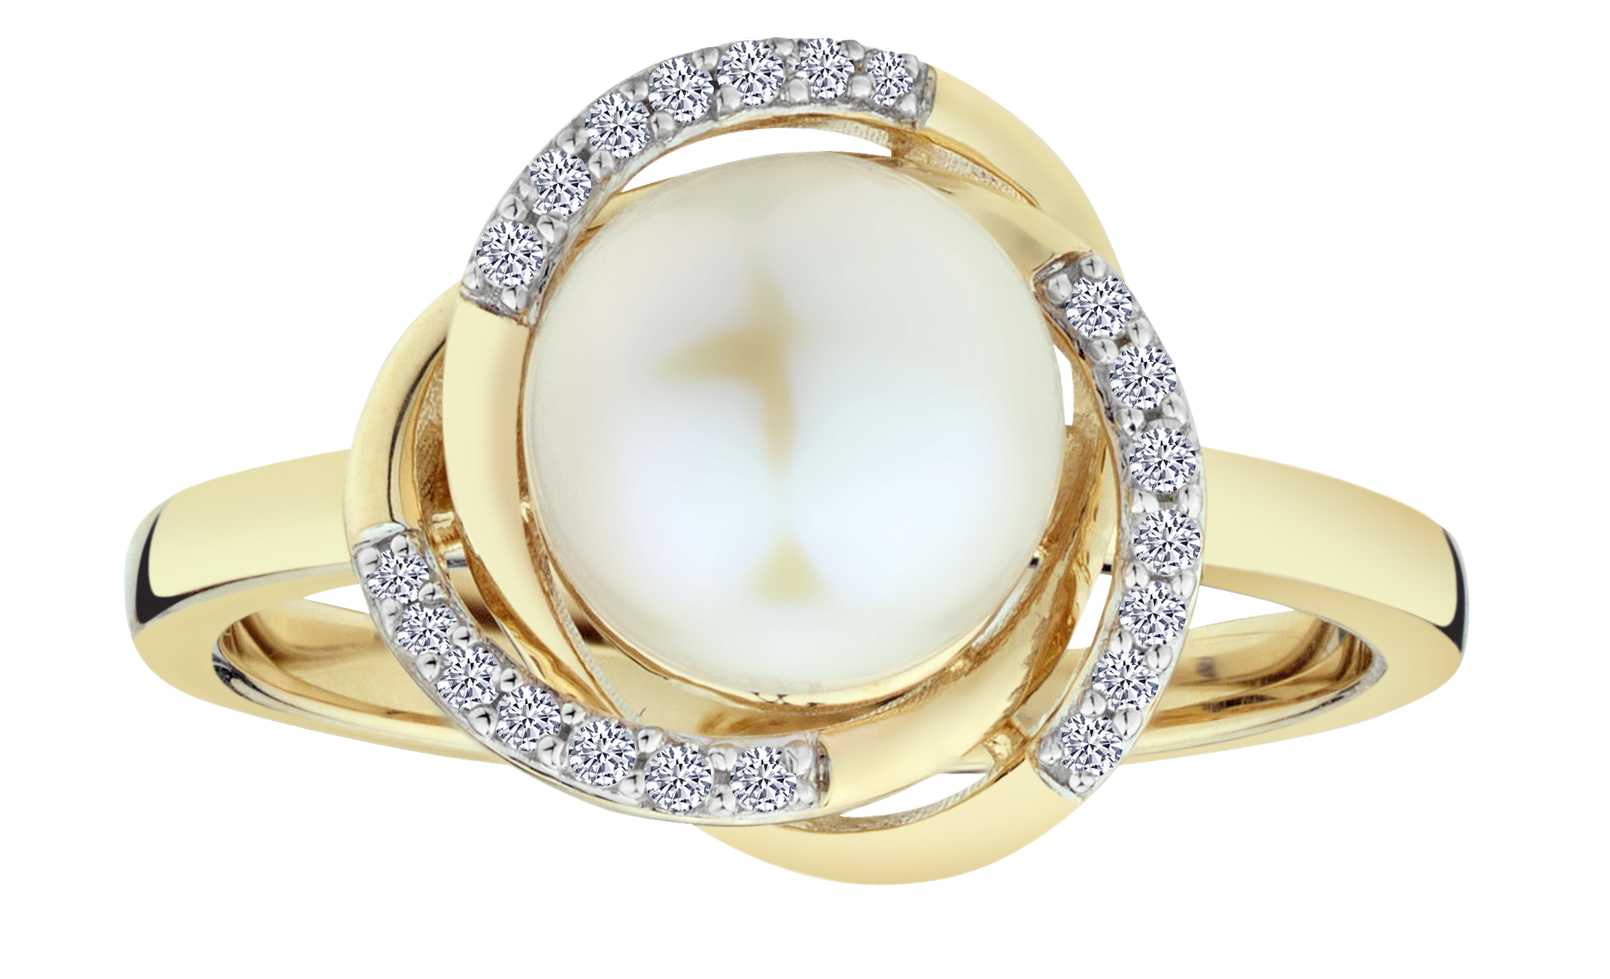 .10 Carat of Diamonds & Pearl Ring, 10kt Yellow Gold.....................NOW